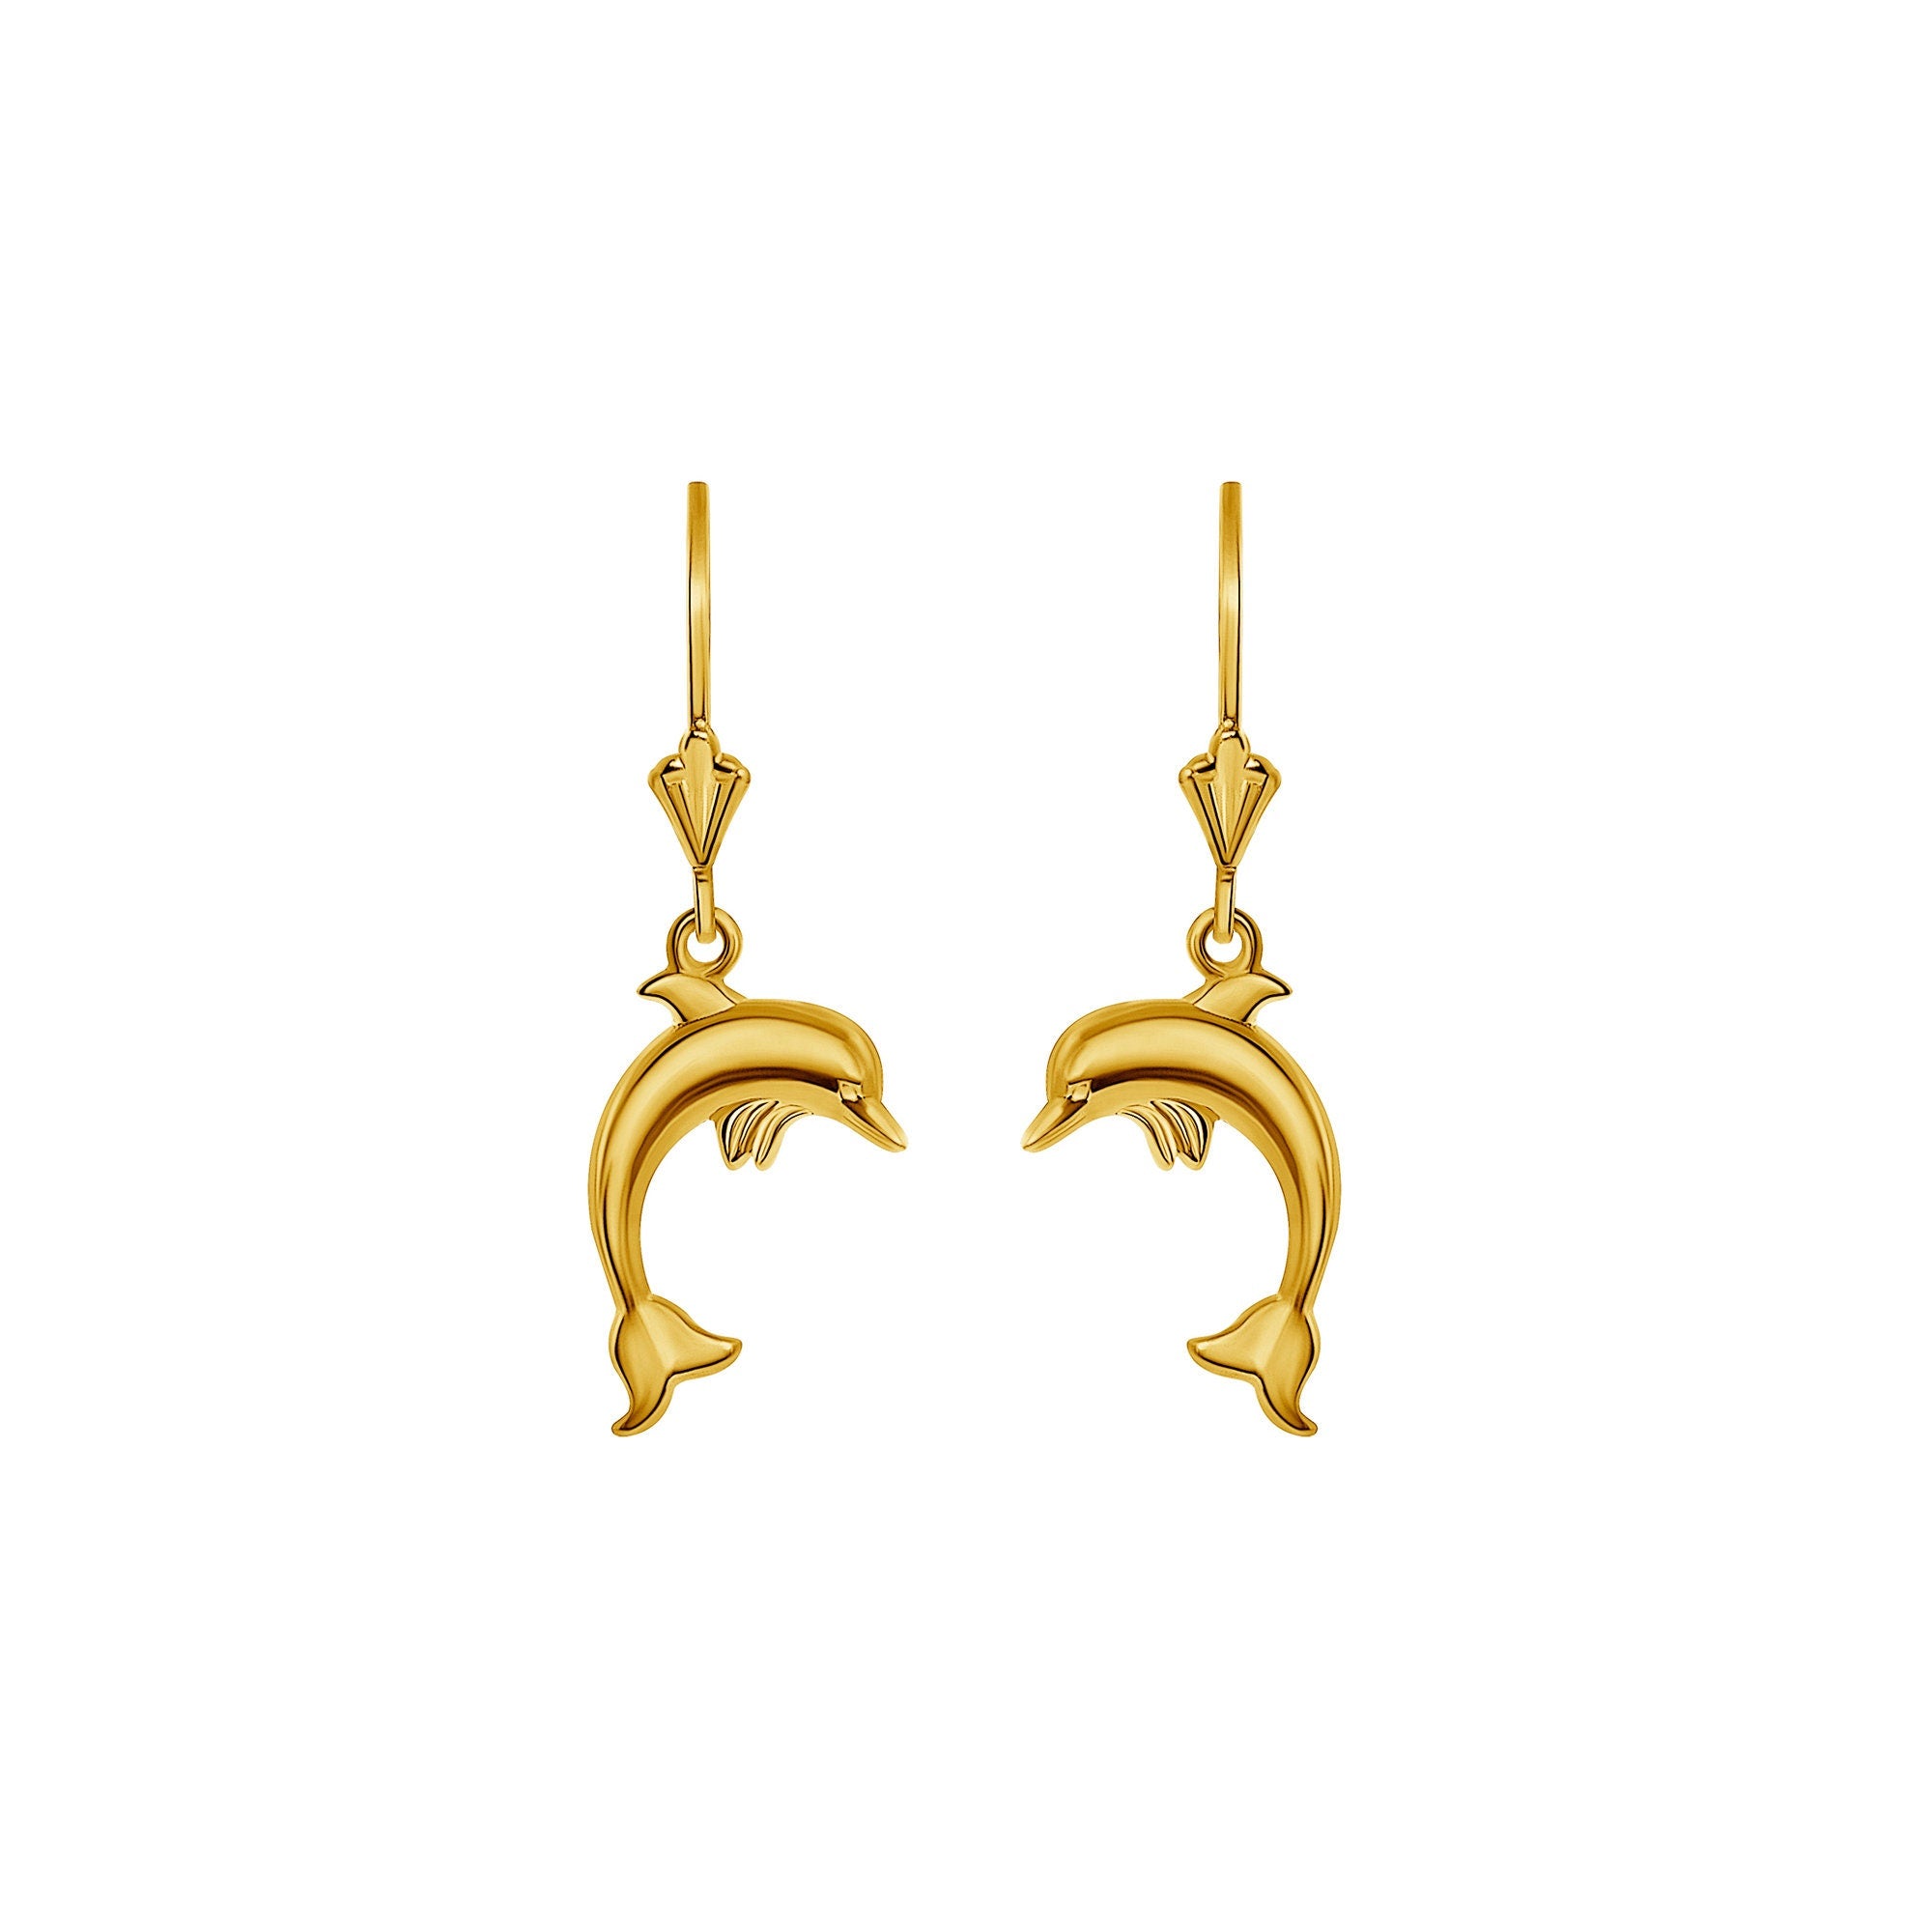 14k solid gold Dolphin Lever Back Drop Earrings